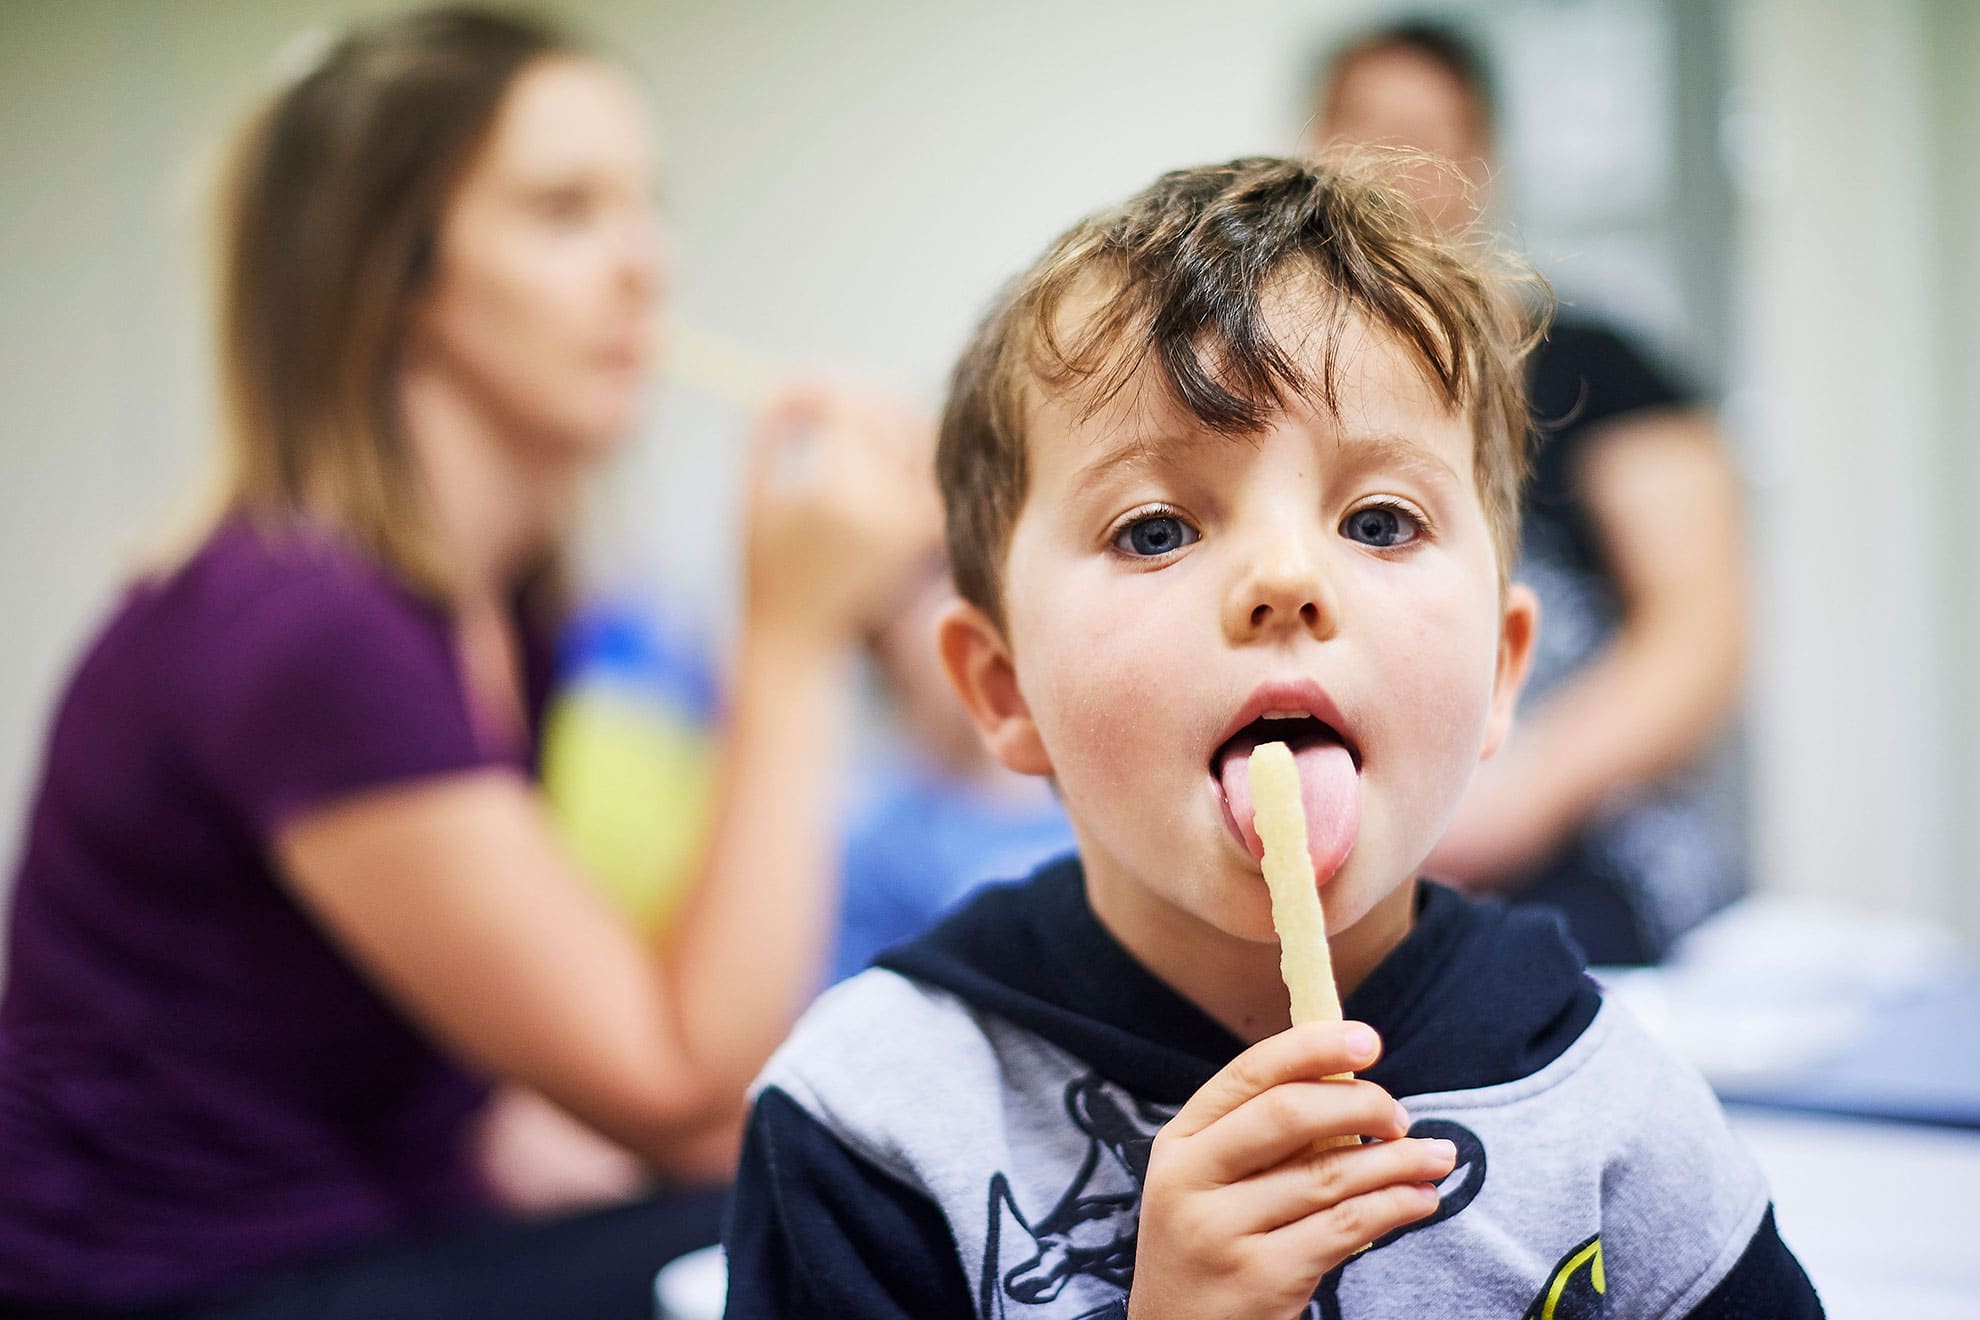 A young boy receiving dietetic services looks at camera while eating